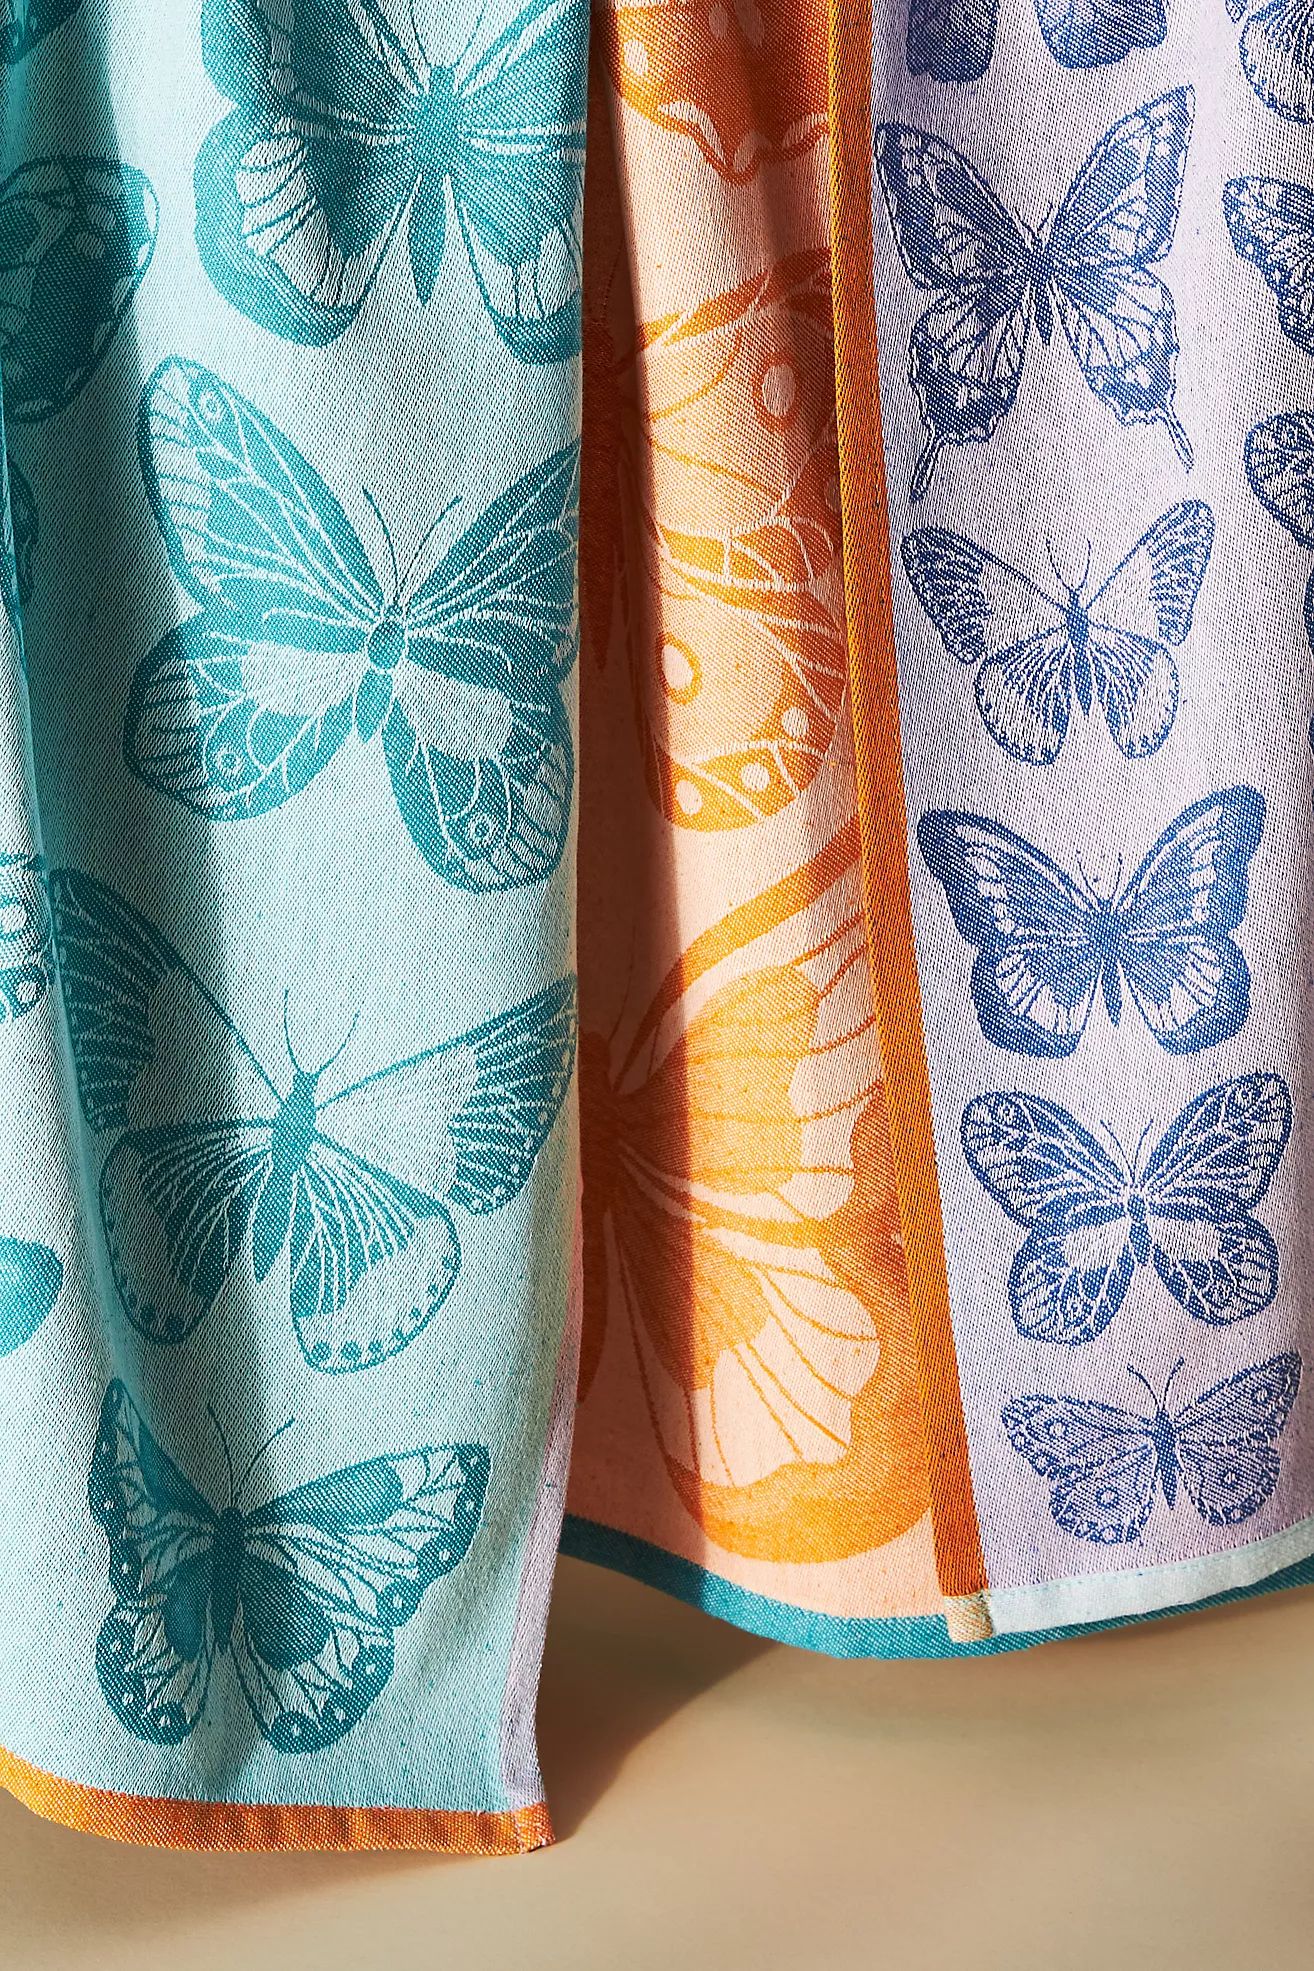 Butterfly Jacquard Dish Towels, Set of 3 | Anthropologie (US)